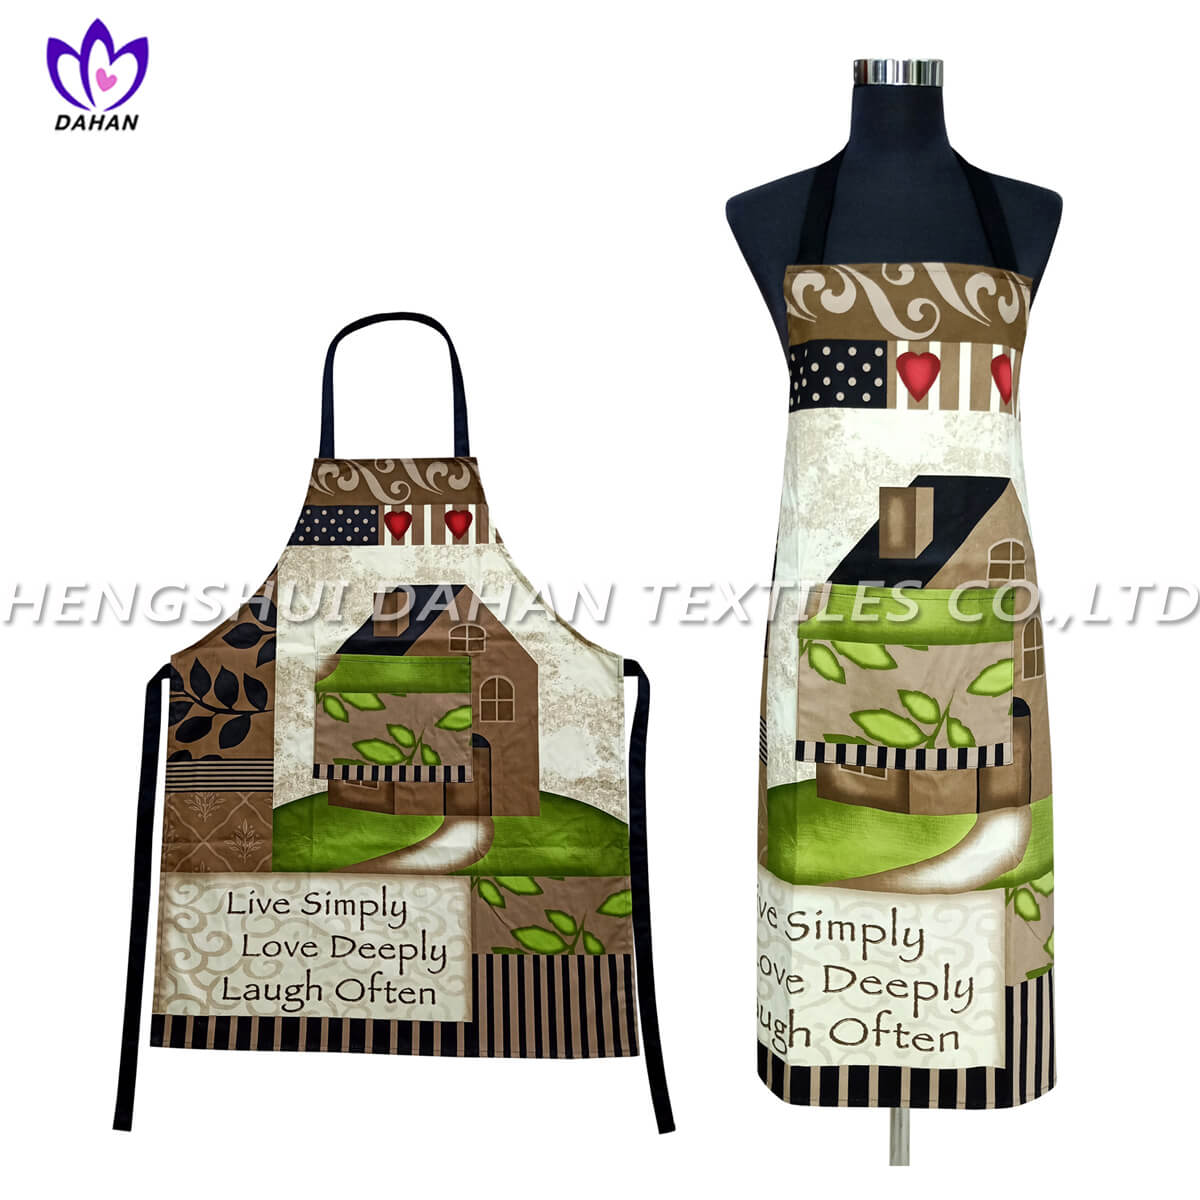 AGP74 100%cotton twill waterproof apron with printing.